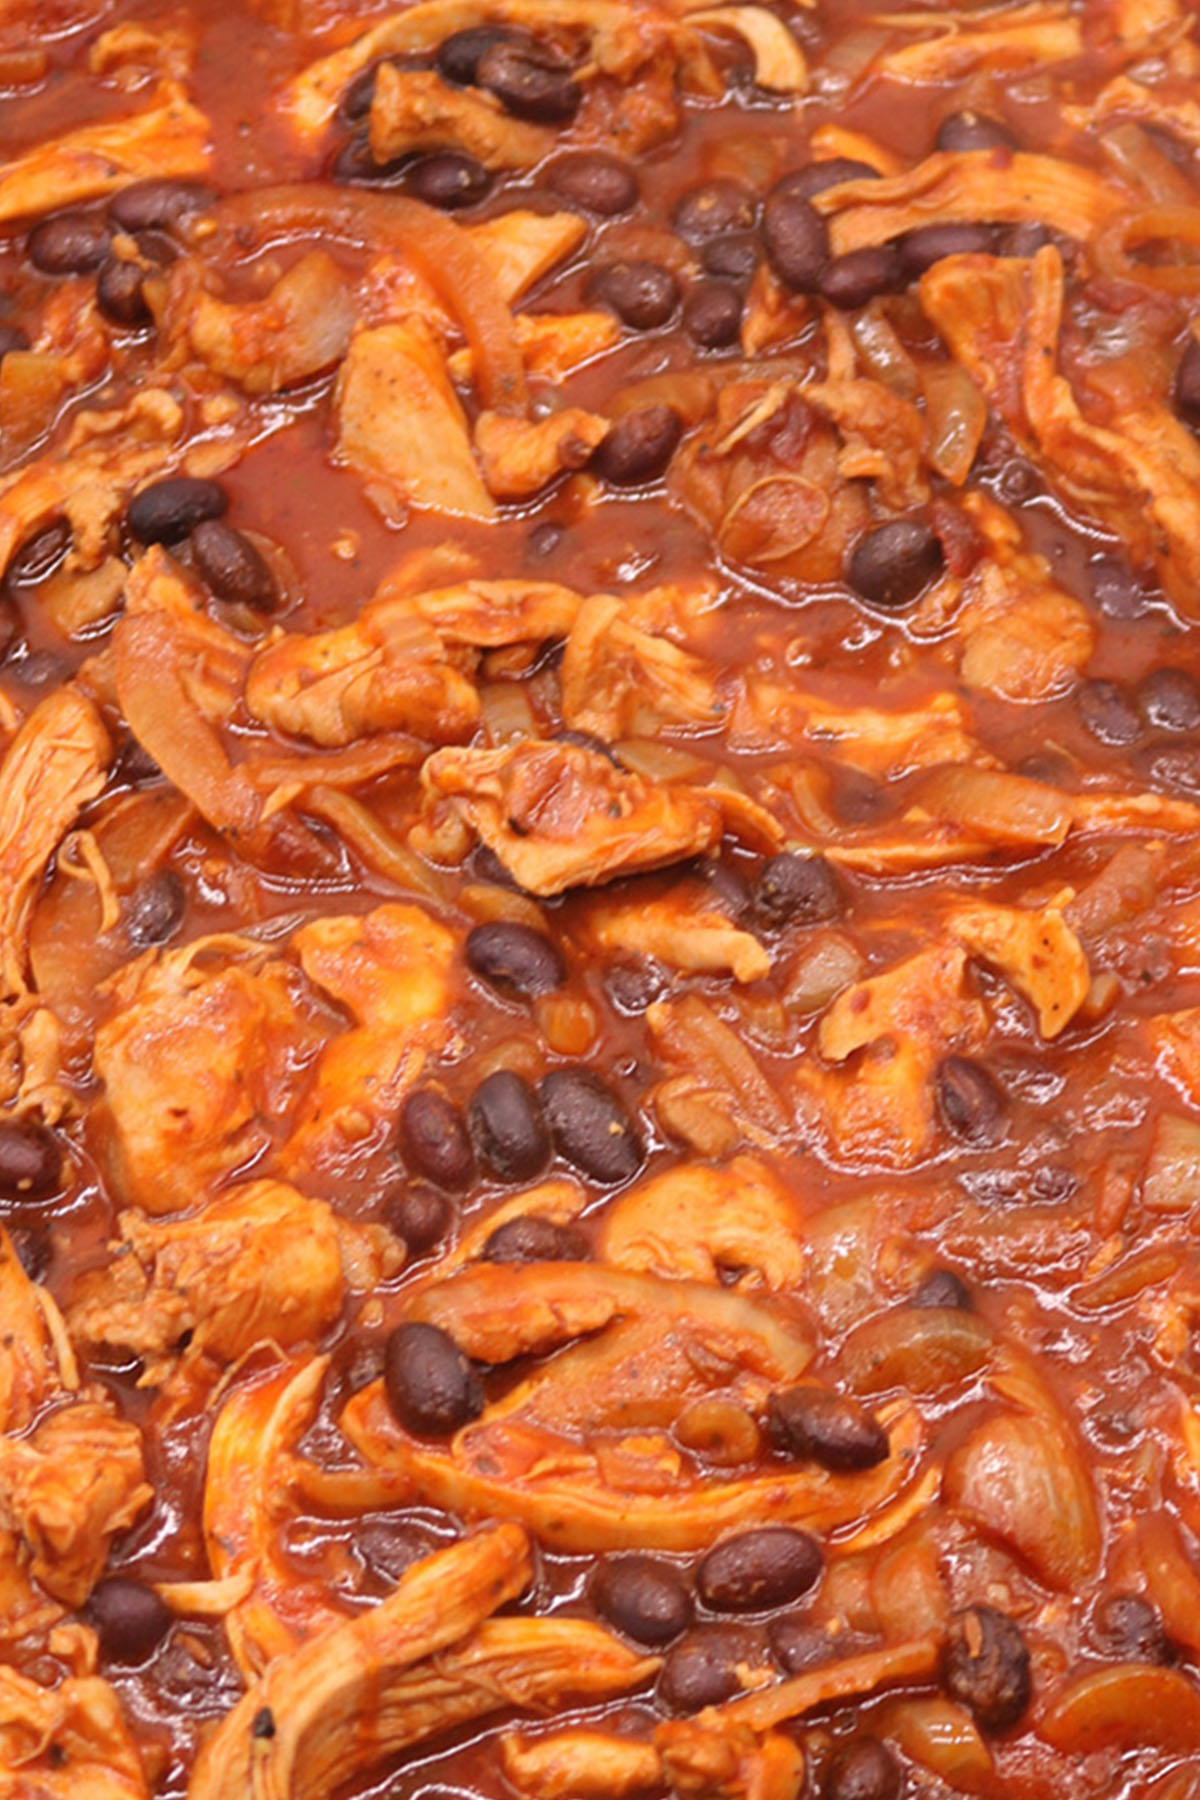 Pulled Chicken and Black Bean Chilli